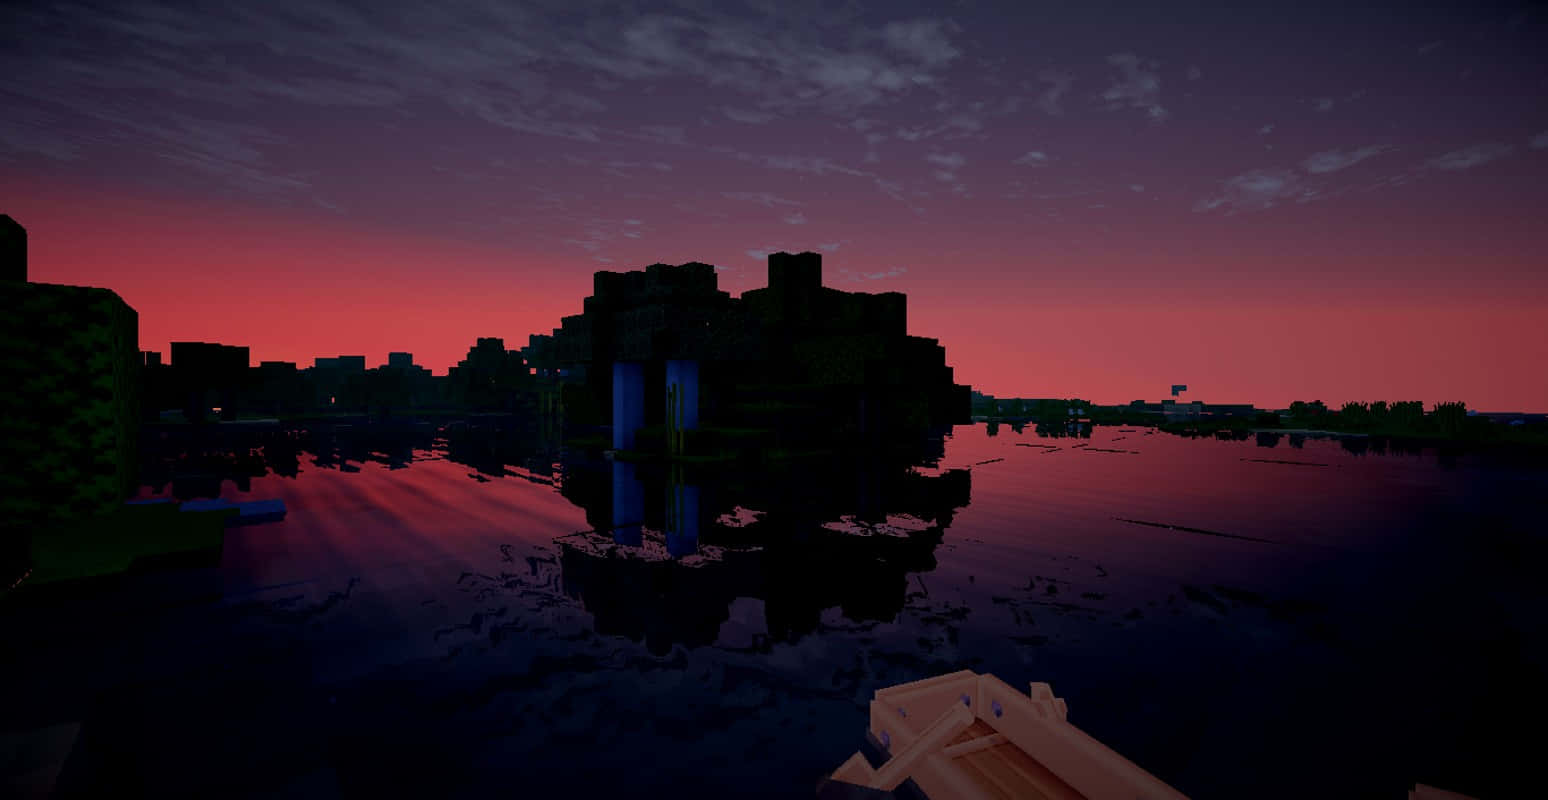 "Peaceful Sunset in Minecraft Universe" Wallpaper